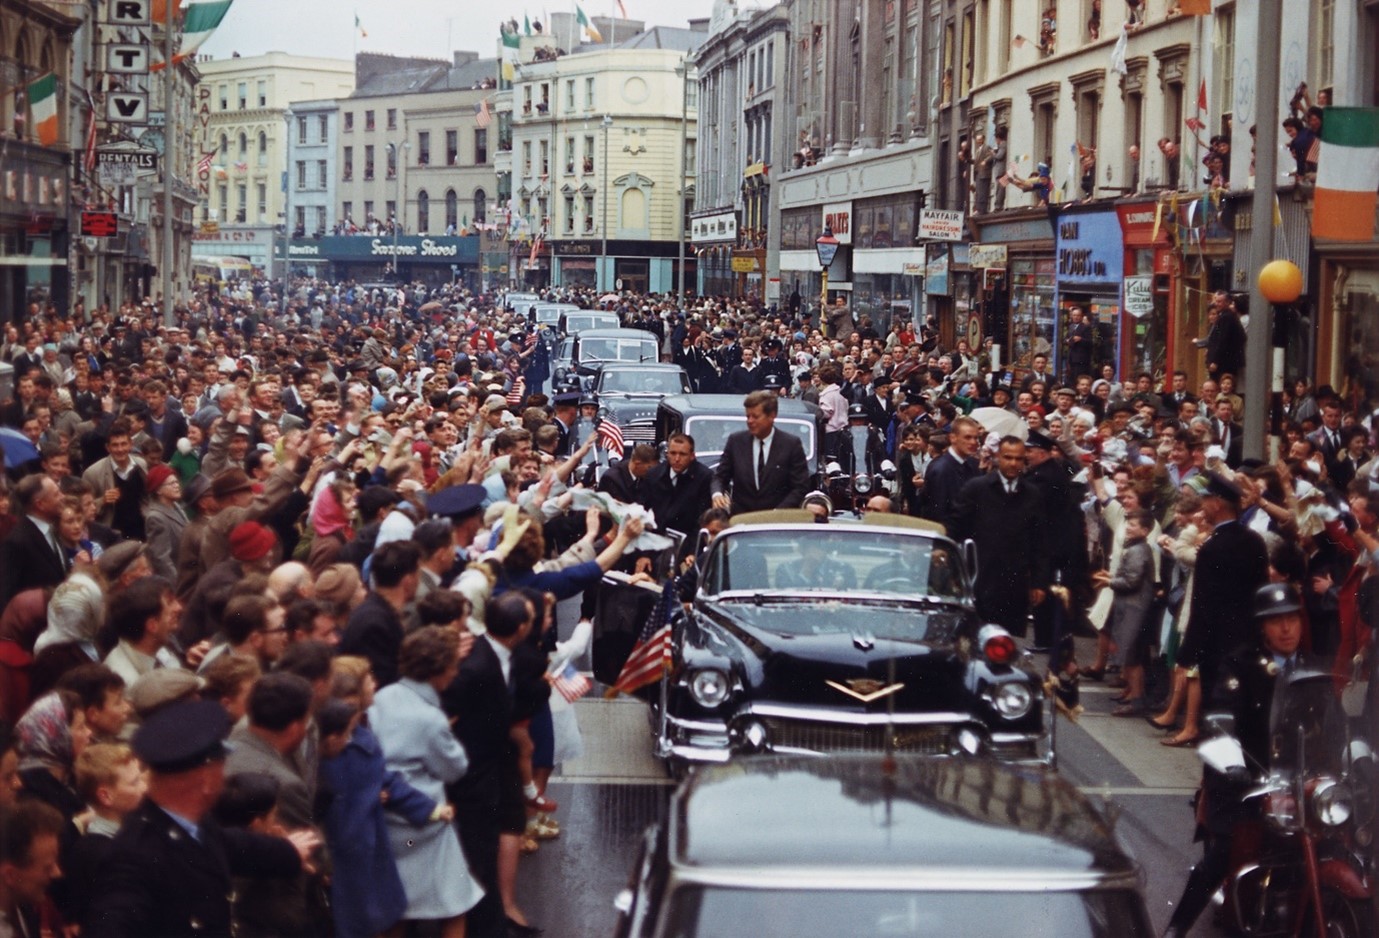 This photograph depicts President Kennedy’s motorcade in Patrick Street in Cork city on the 28th June 1963. 